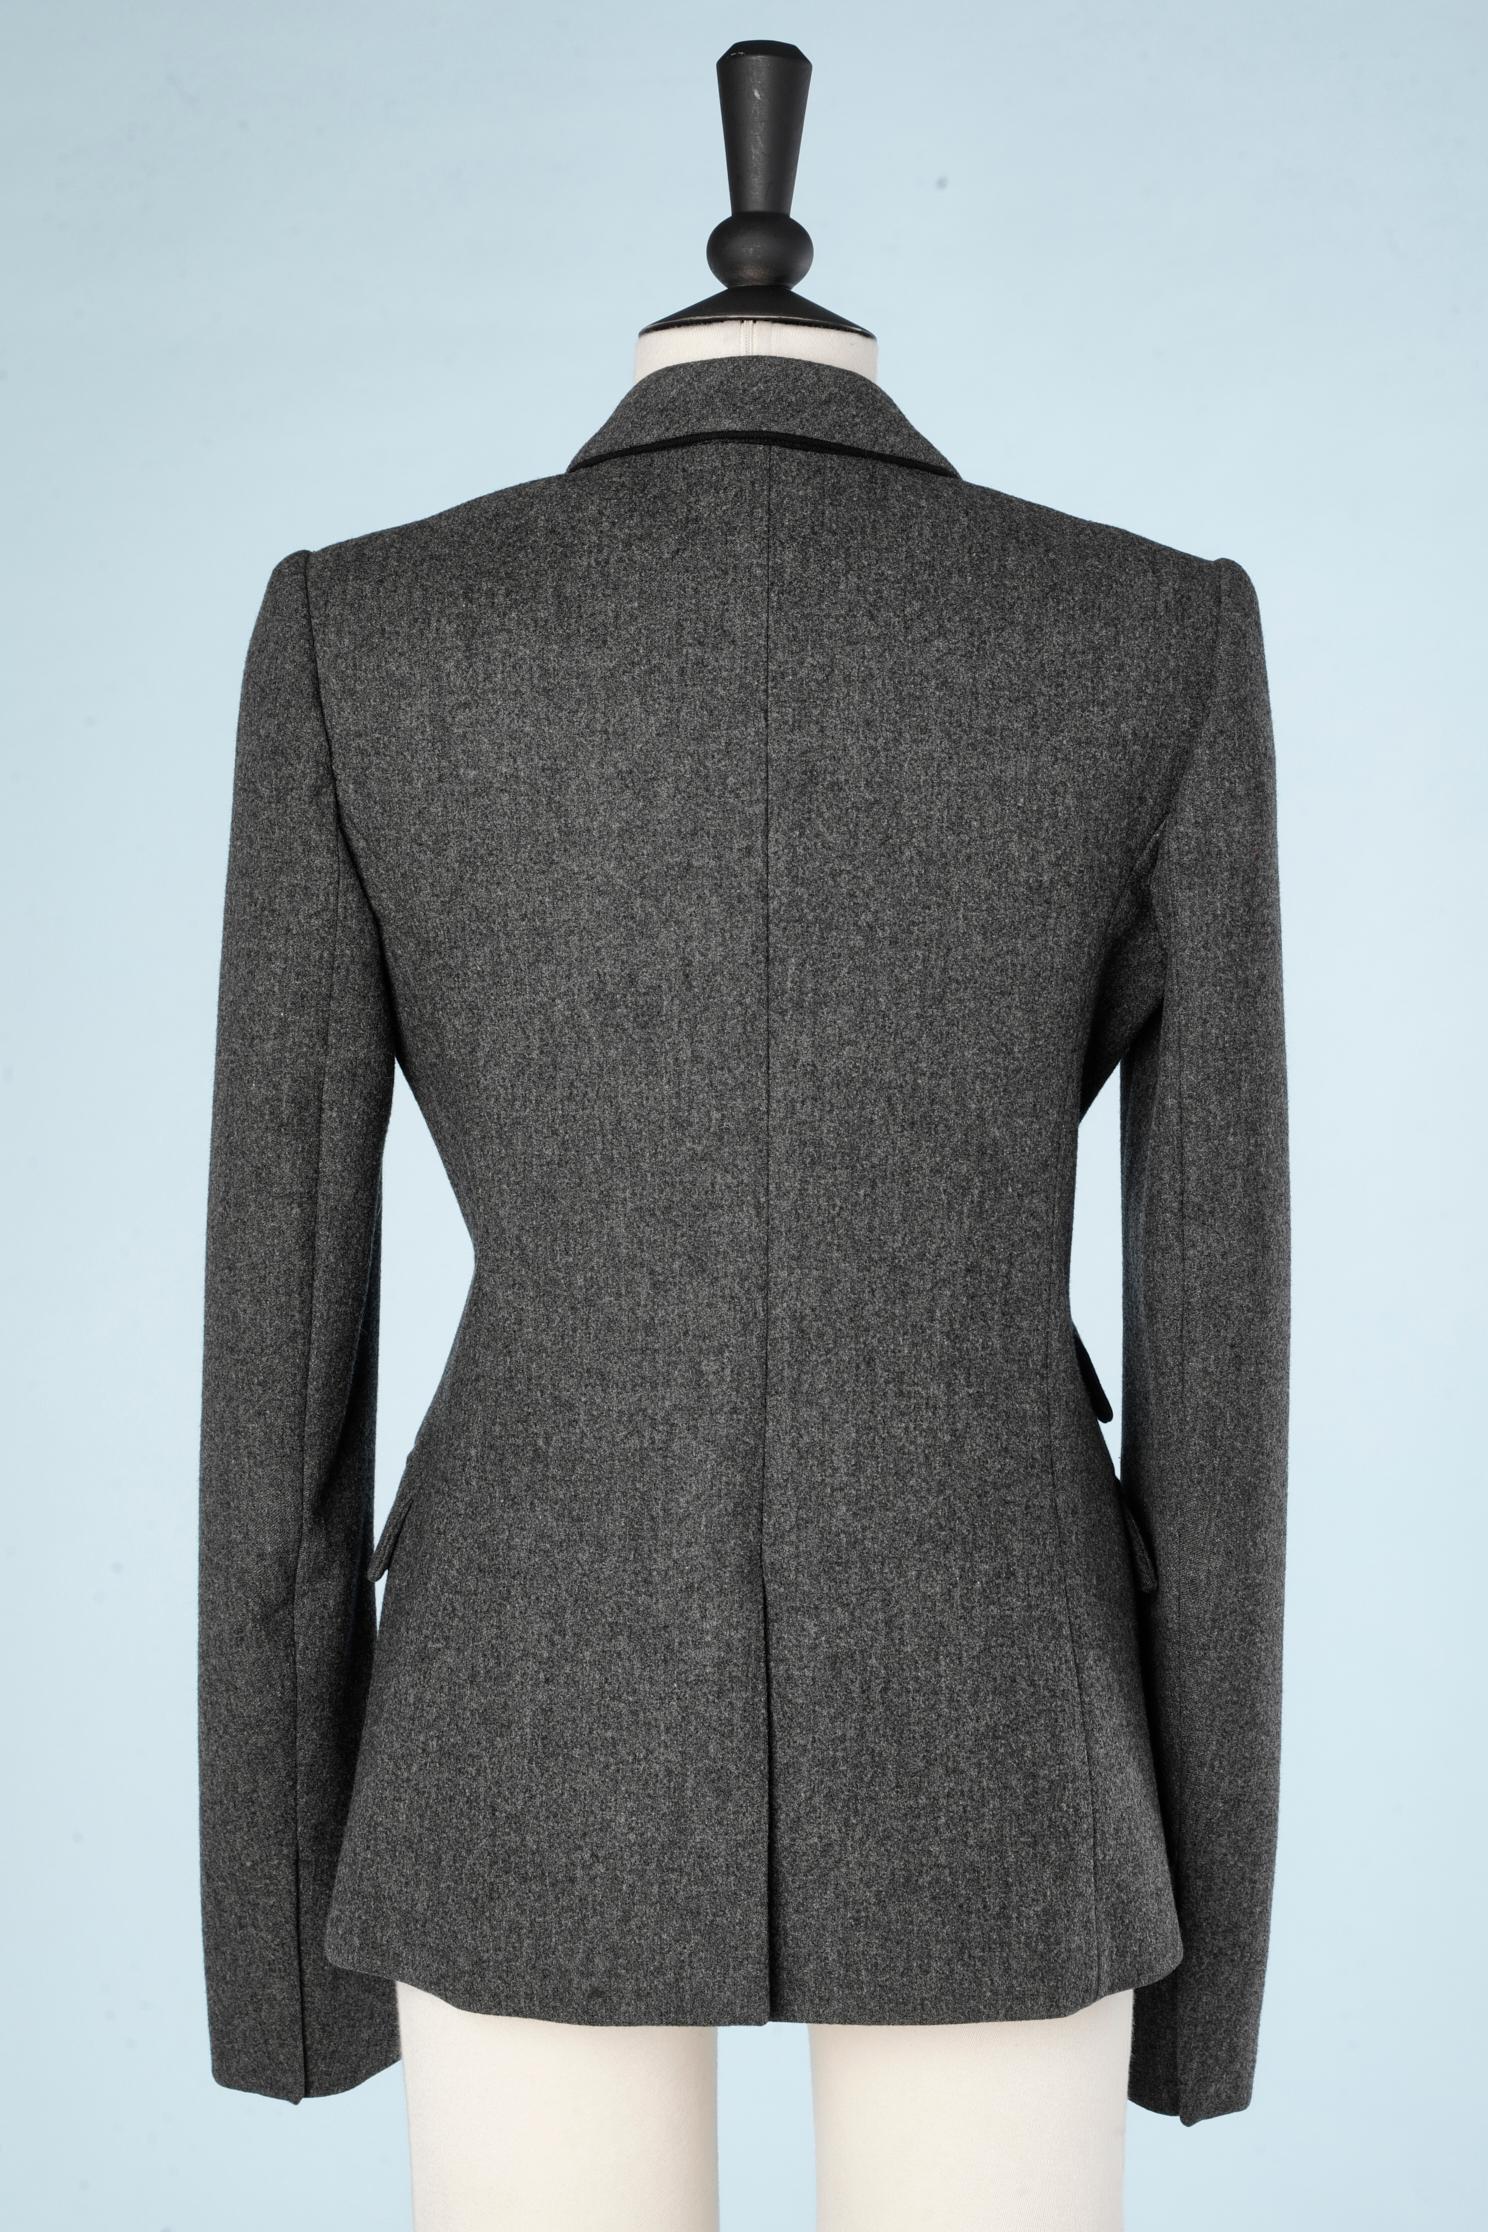 Black Double breasted grey wool blazer with seal buttons Balenciaga by N. Ghesquière For Sale